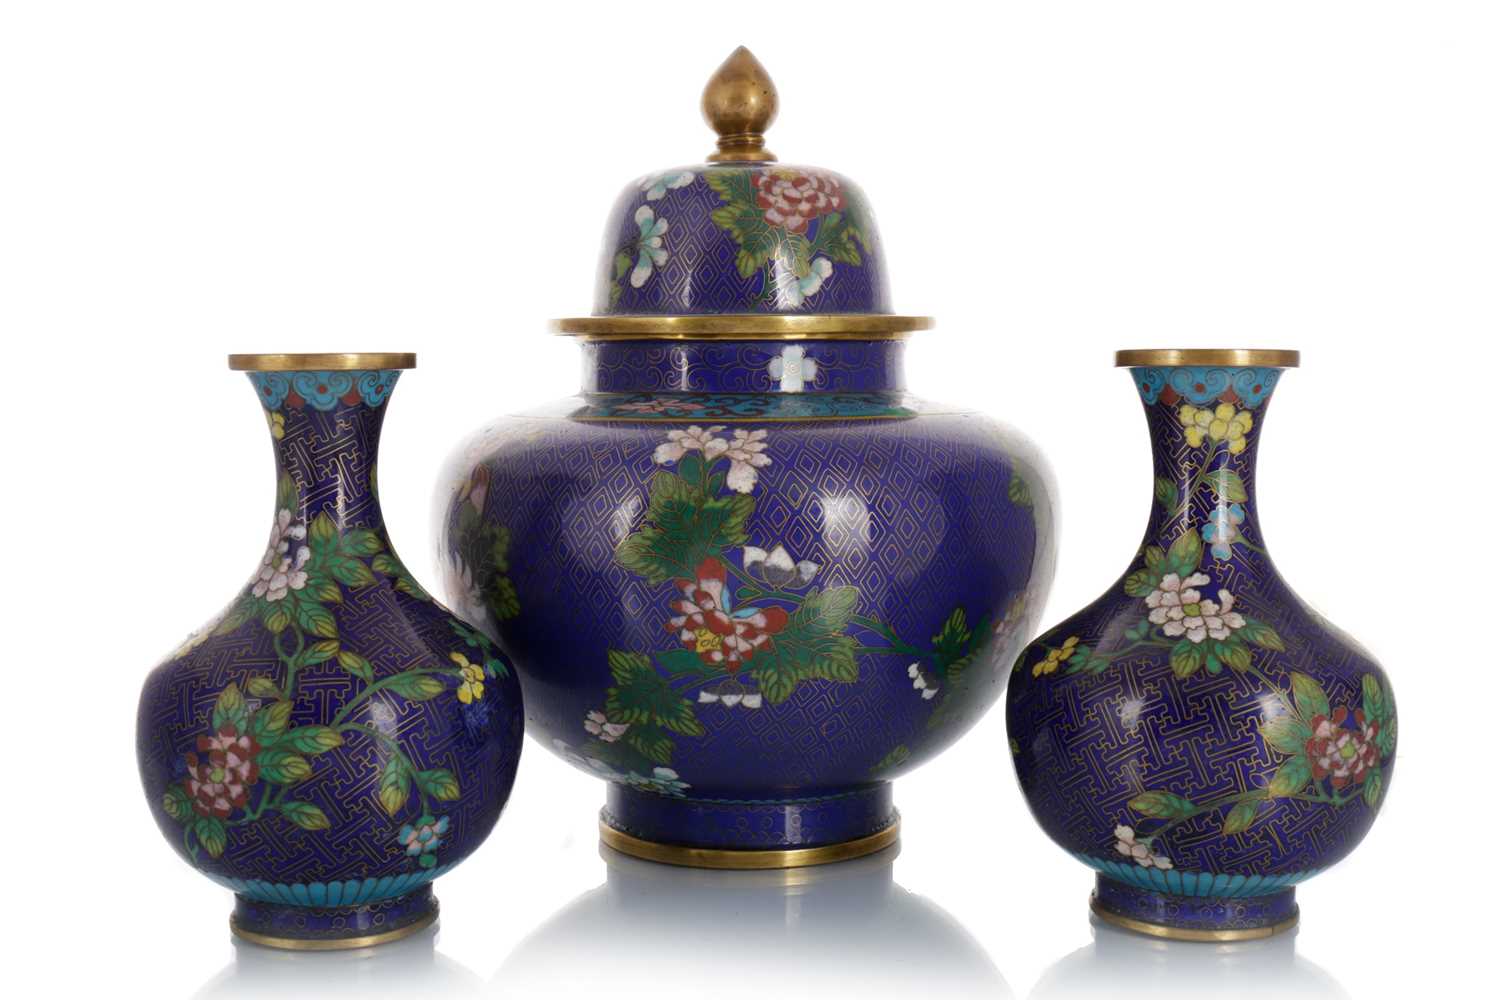 GROUP OF THREE CHINESE CLOISONNE VASES, EARLY 20TH CENTURY